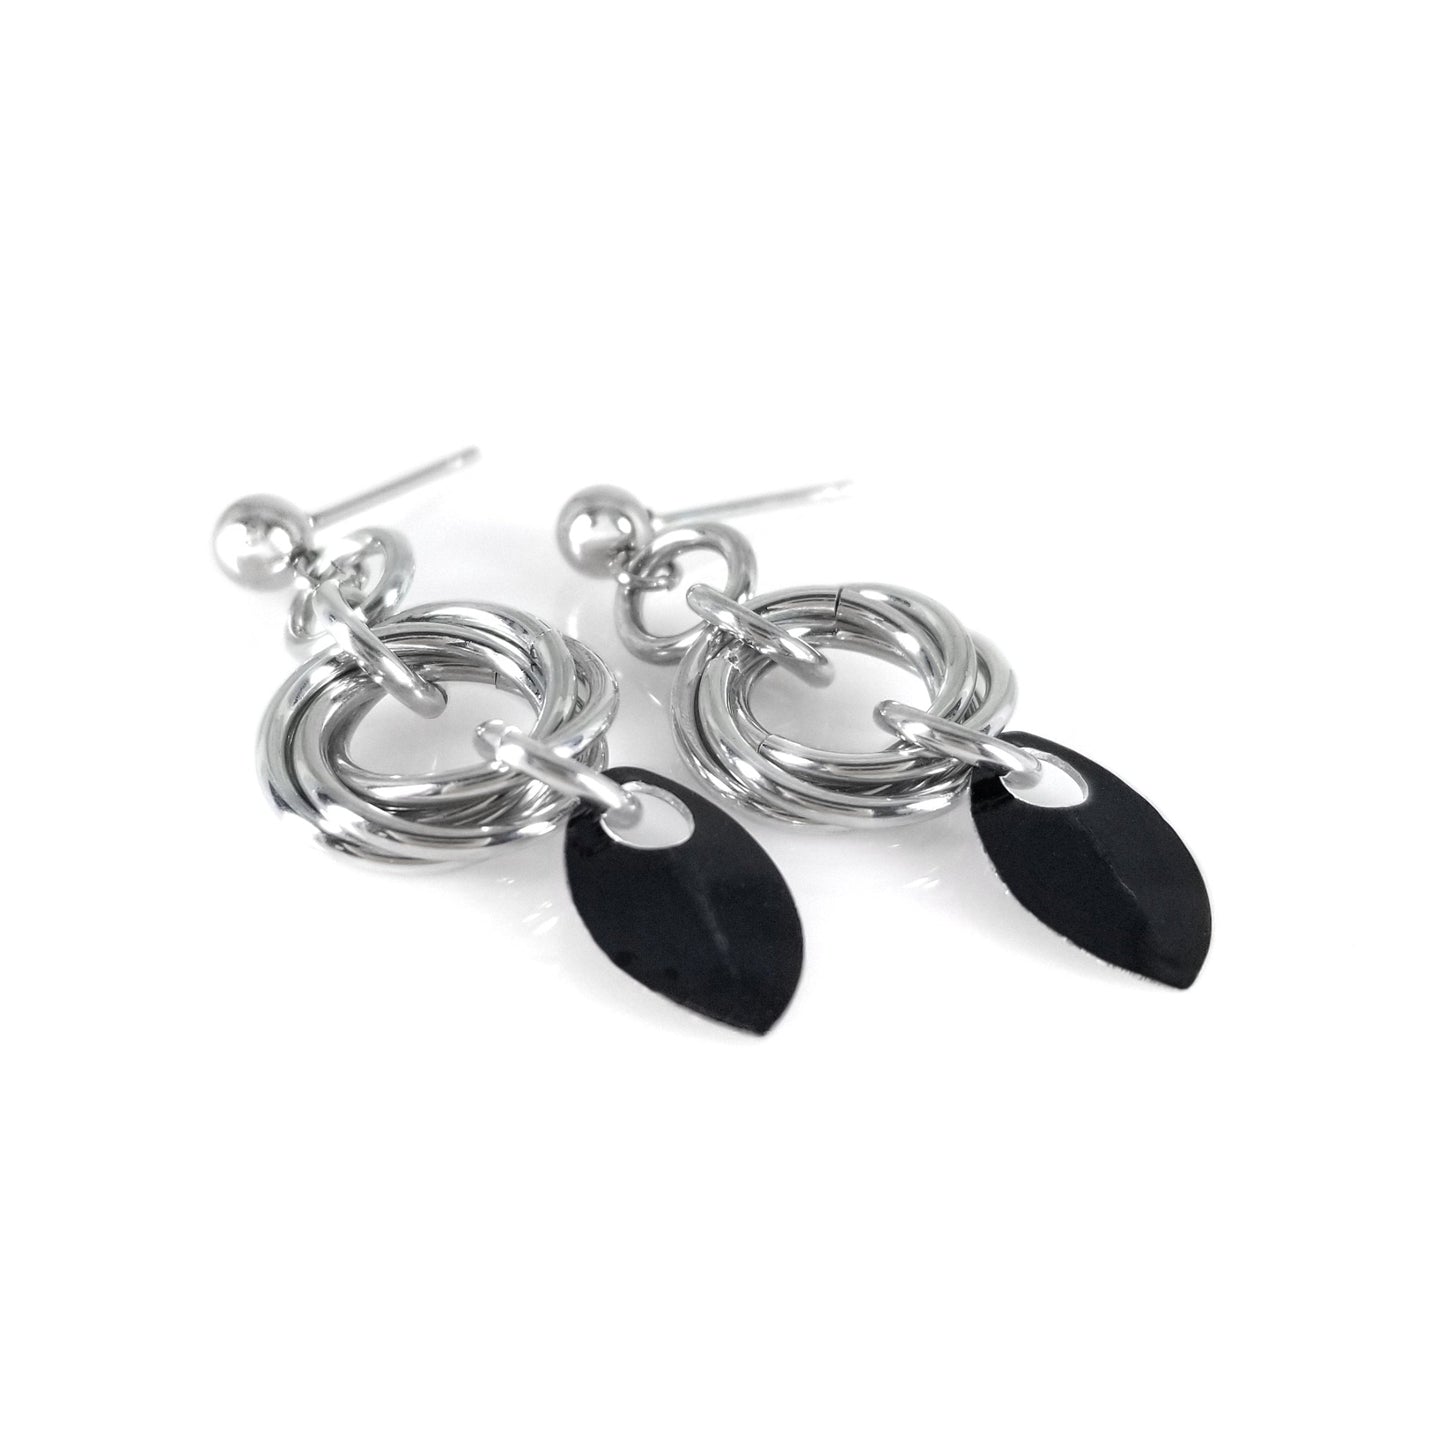 Black baby scale love knot mobius weave chainmaille aluminum earrings on stainless steel ear post